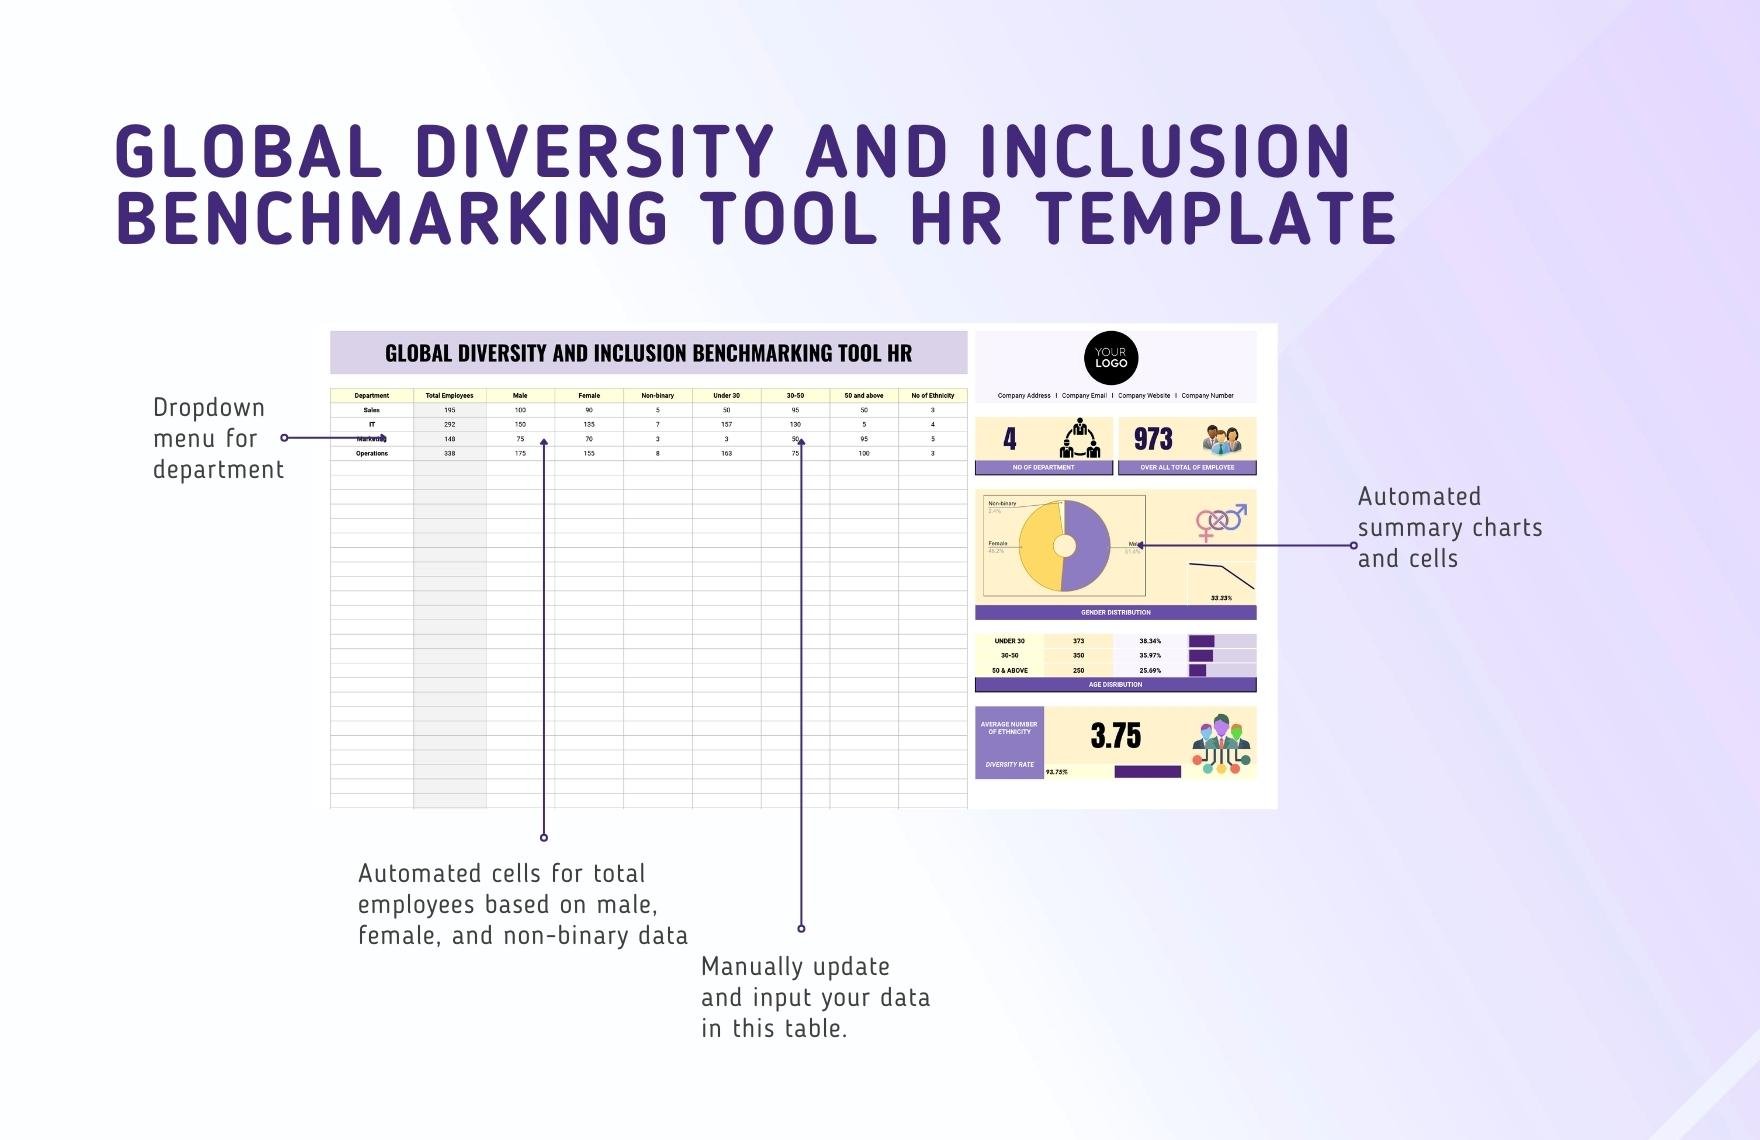 Global Diversity and Inclusion Benchmarking Tool HR Template